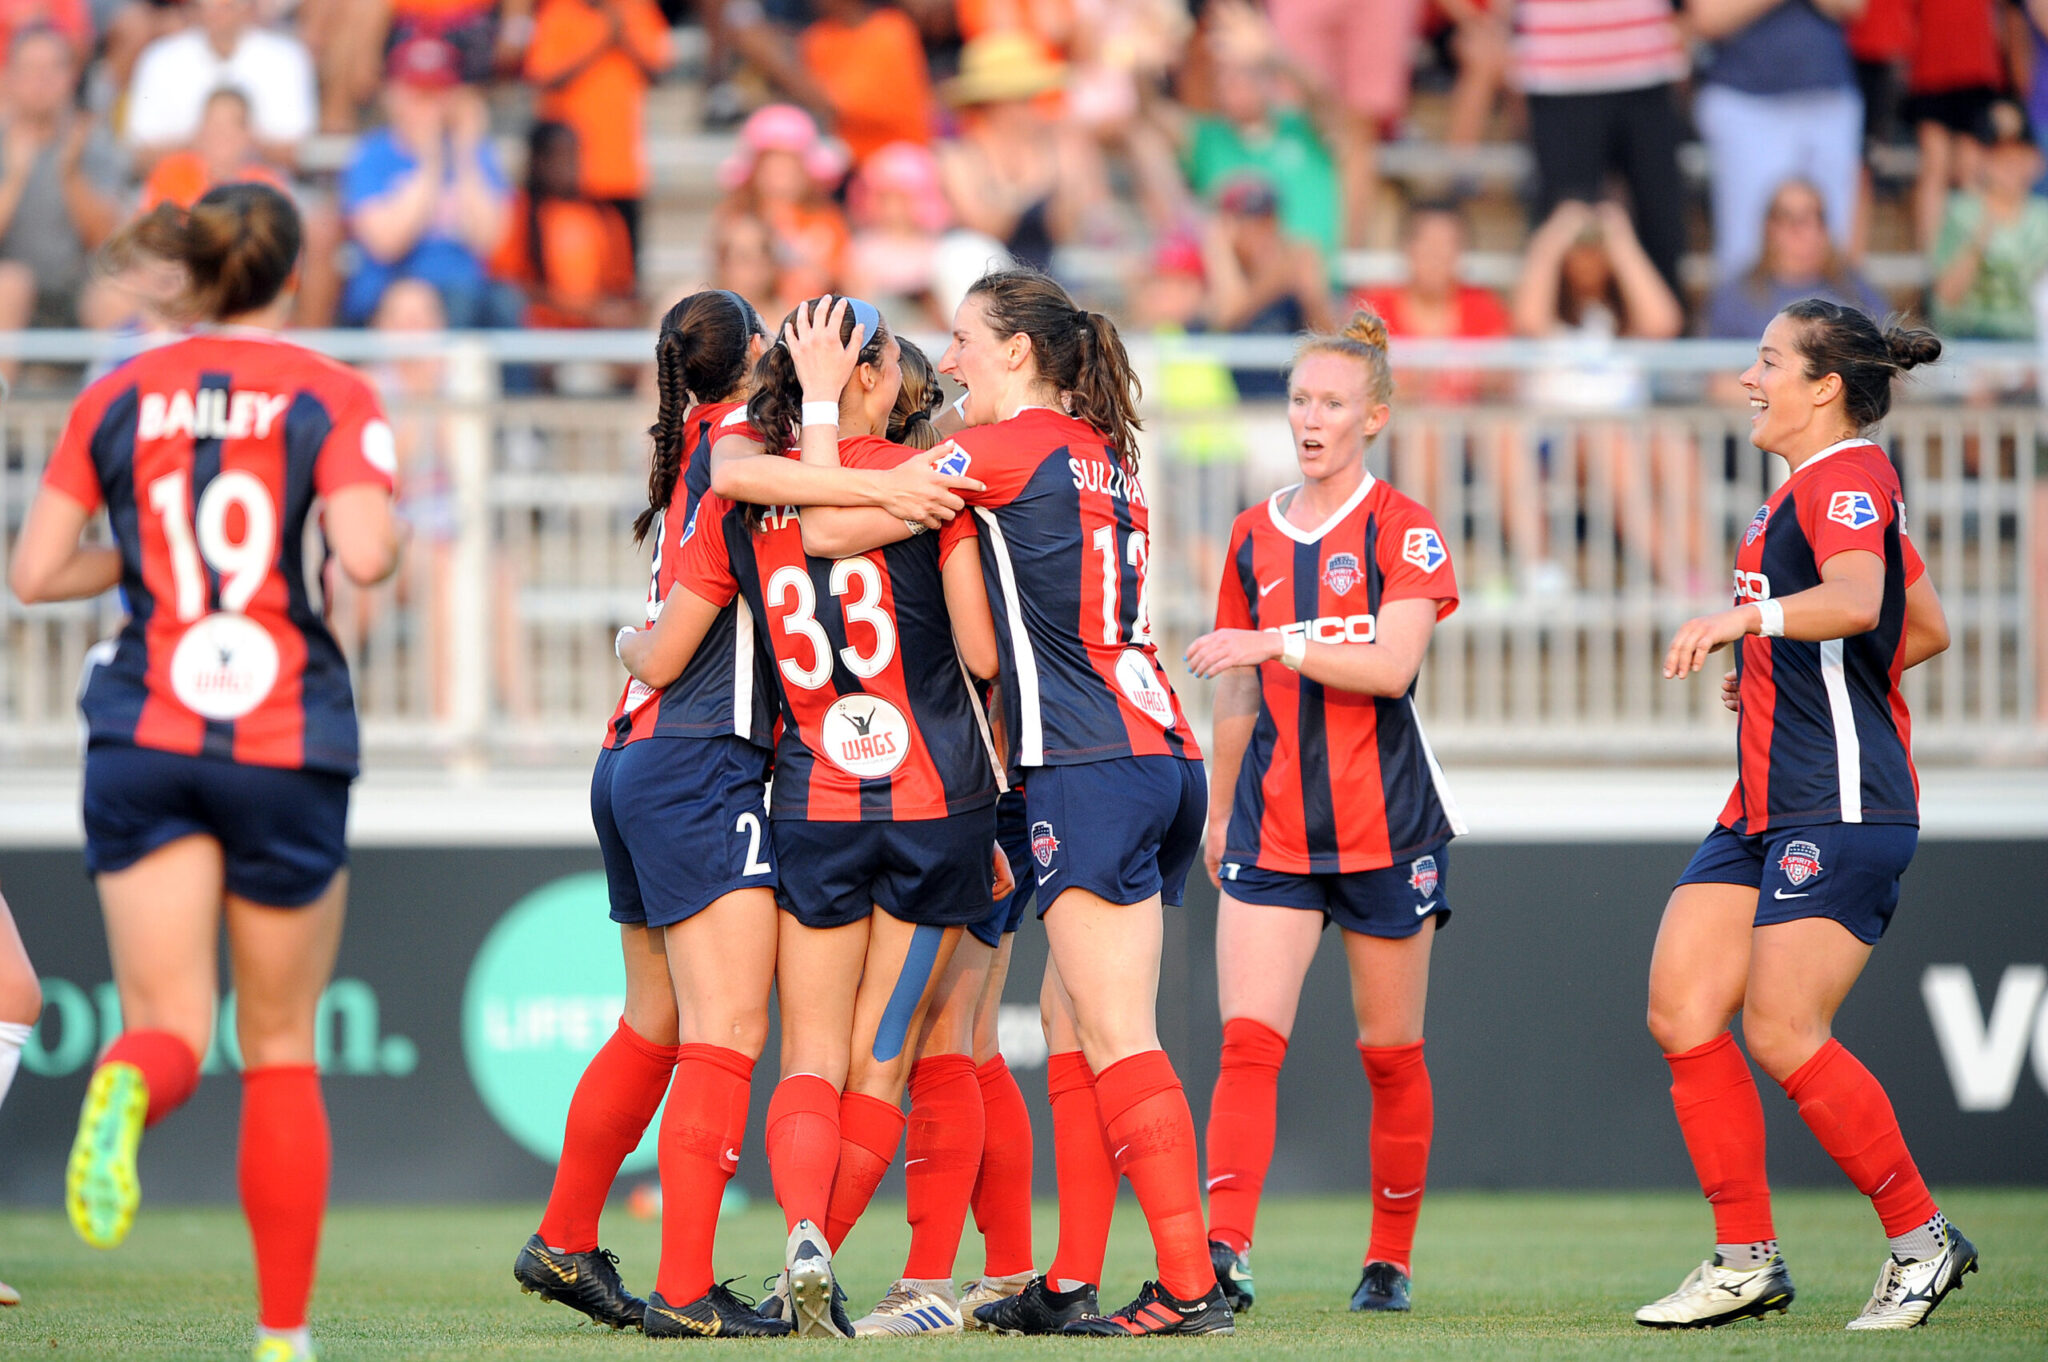 Spirit defeat Utah 2-0 to take over top spot in league standings Featured Image